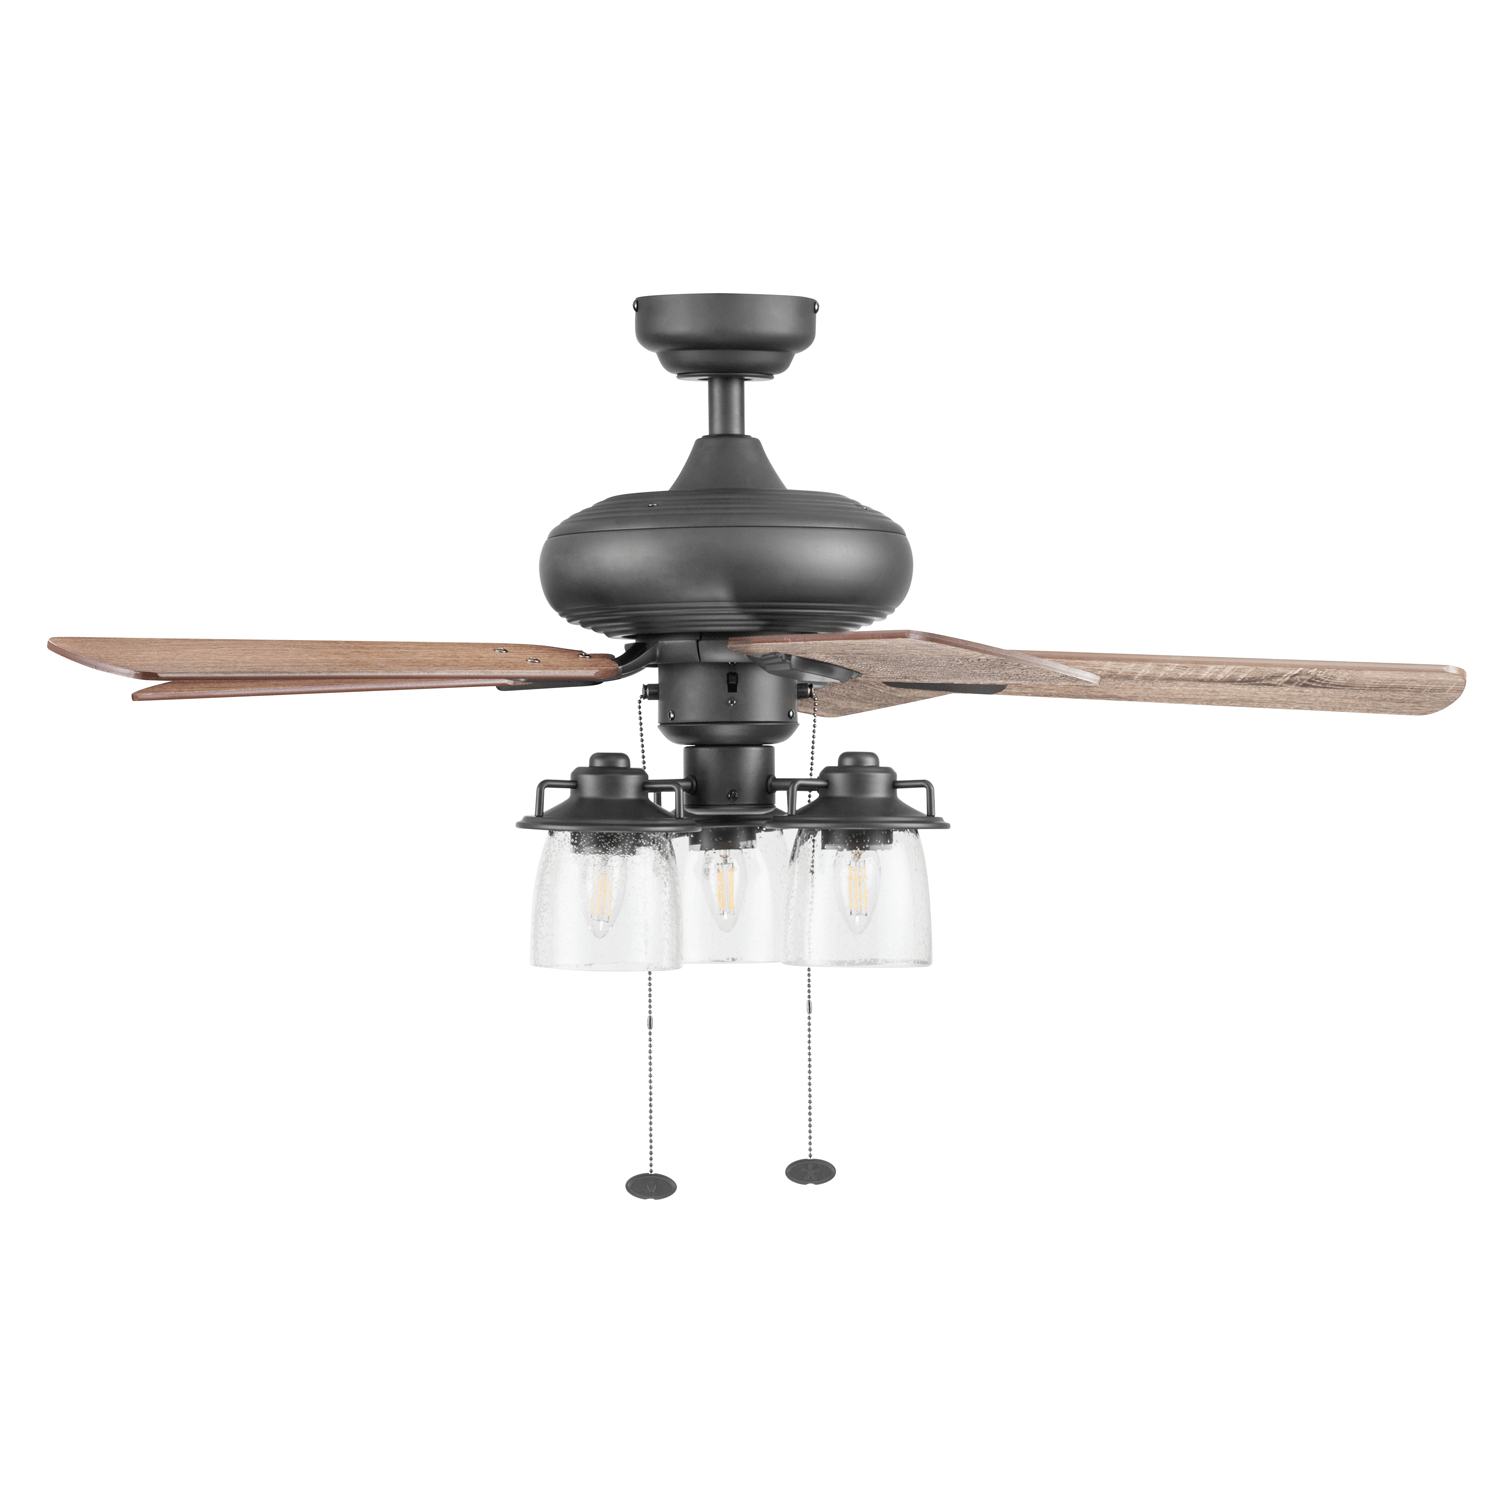 42 Inch Crown Ridge, Bronze, Remote Control, Ceiling Fan by Prominence Home